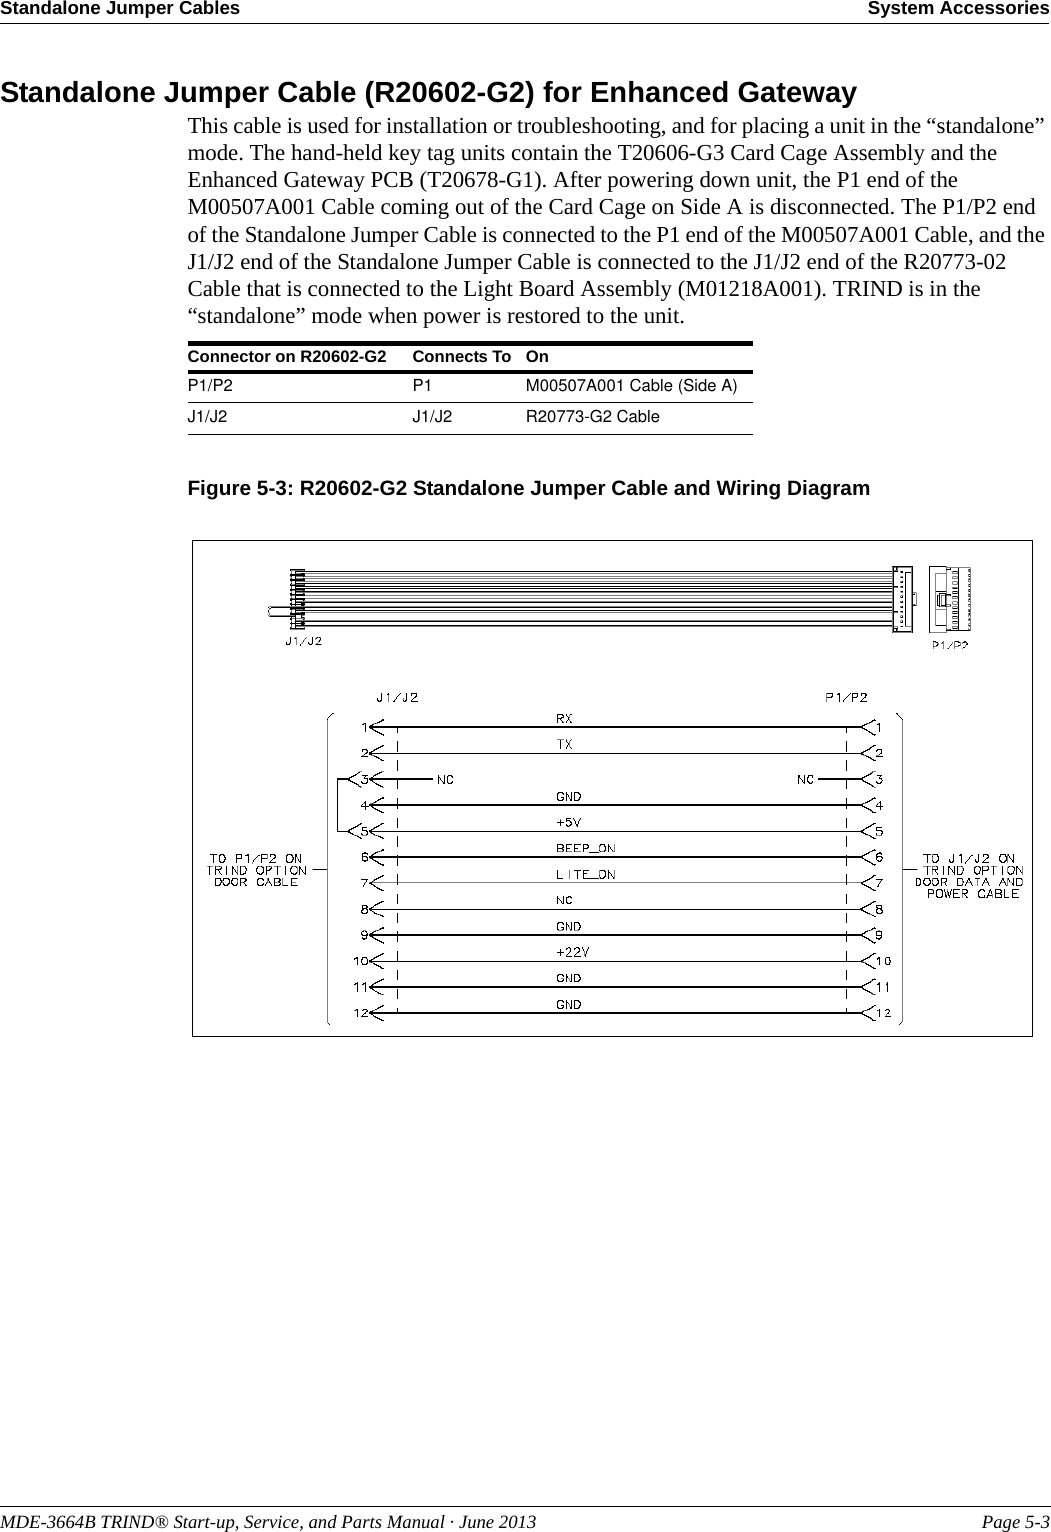 MDE-3664B TRIND® Start-up, Service, and Parts Manual · June 2013 Page 5-3Standalone Jumper Cables System AccessoriesStandalone Jumper Cable (R20602-G2) for Enhanced GatewayThis cable is used for installation or troubleshooting, and for placing a unit in the “standalone” mode. The hand-held key tag units contain the T20606-G3 Card Cage Assembly and the Enhanced Gateway PCB (T20678-G1). After powering down unit, the P1 end of the M00507A001 Cable coming out of the Card Cage on Side A is disconnected. The P1/P2 end of the Standalone Jumper Cable is connected to the P1 end of the M00507A001 Cable, and the J1/J2 end of the Standalone Jumper Cable is connected to the J1/J2 end of the R20773-02 Cable that is connected to the Light Board Assembly (M01218A001). TRIND is in the “standalone” mode when power is restored to the unit.Connector on R20602-G2 Connects To OnP1/P2 P1  M00507A001 Cable (Side A)J1/J2 J1/J2 R20773-G2 CableFigure 5-3: R20602-G2 Standalone Jumper Cable and Wiring Diagram 